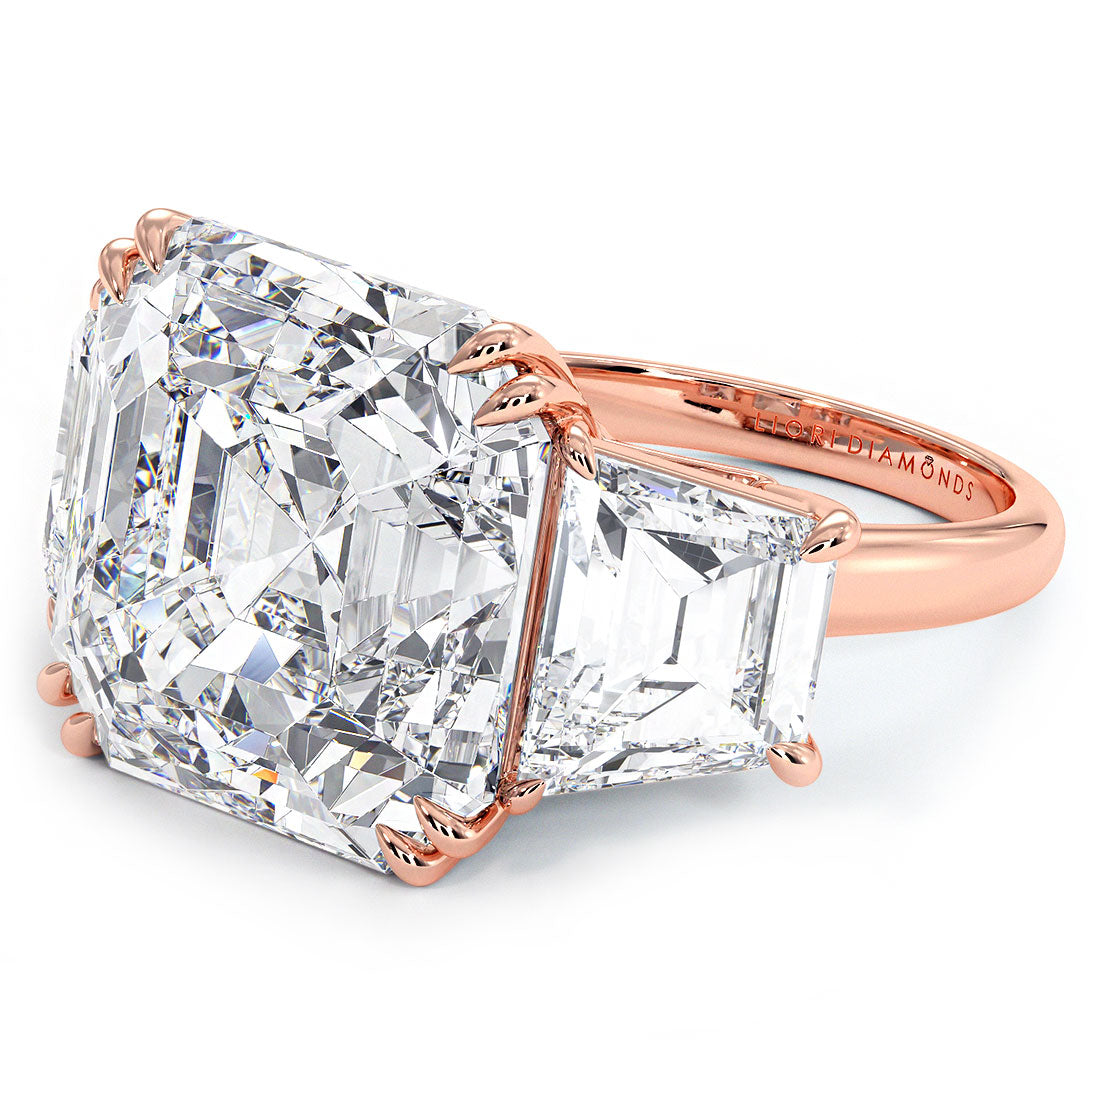 23.22ctw GIA Certified F-VS1 Asscher Cut & Trapezoid Three Stone Lab Grown Diamond Engagement Ring set in 14k Rose Gold